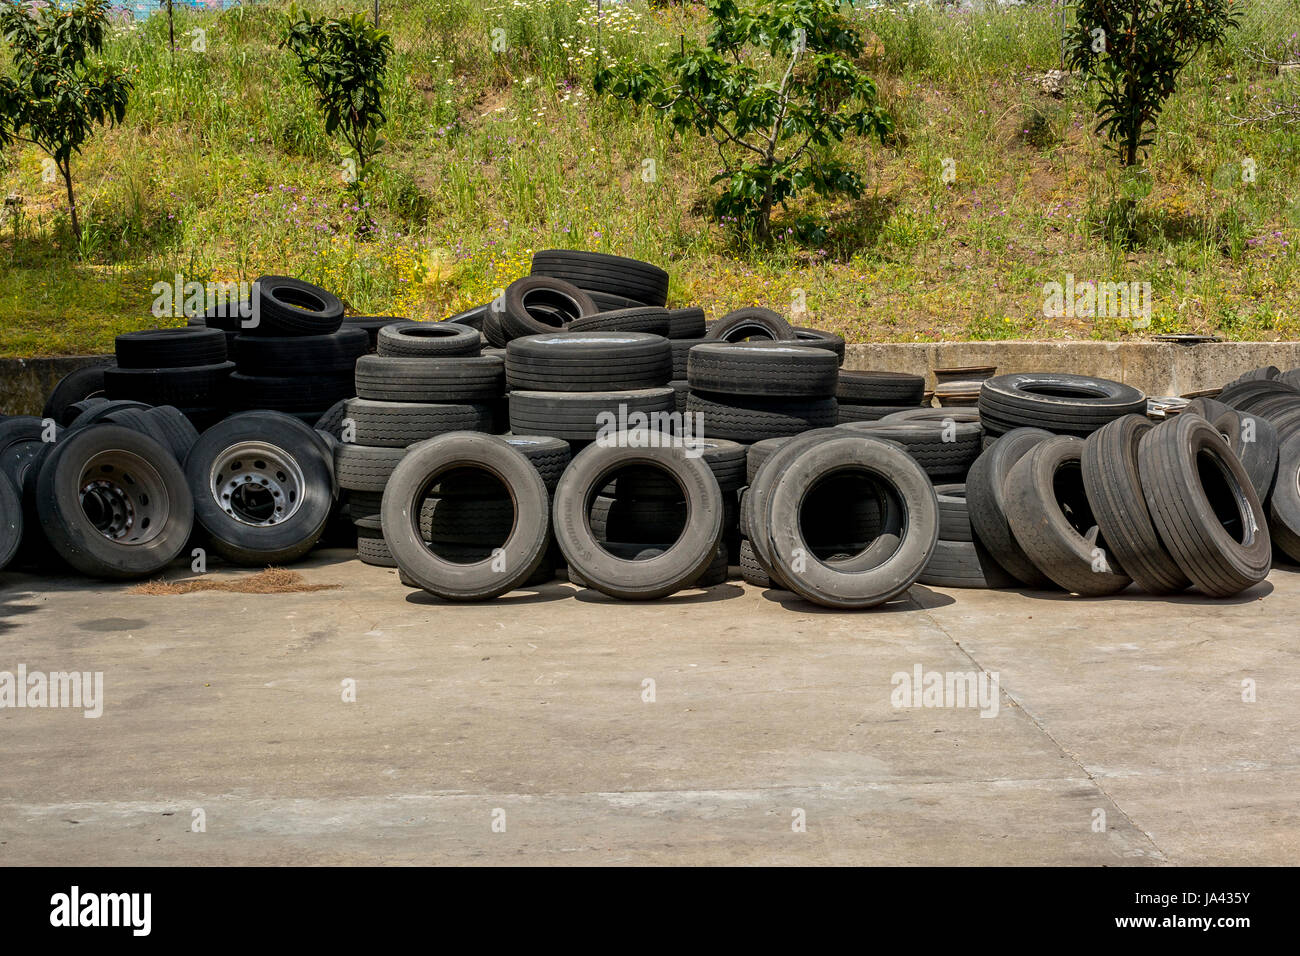 Tires new and used Stock Photo